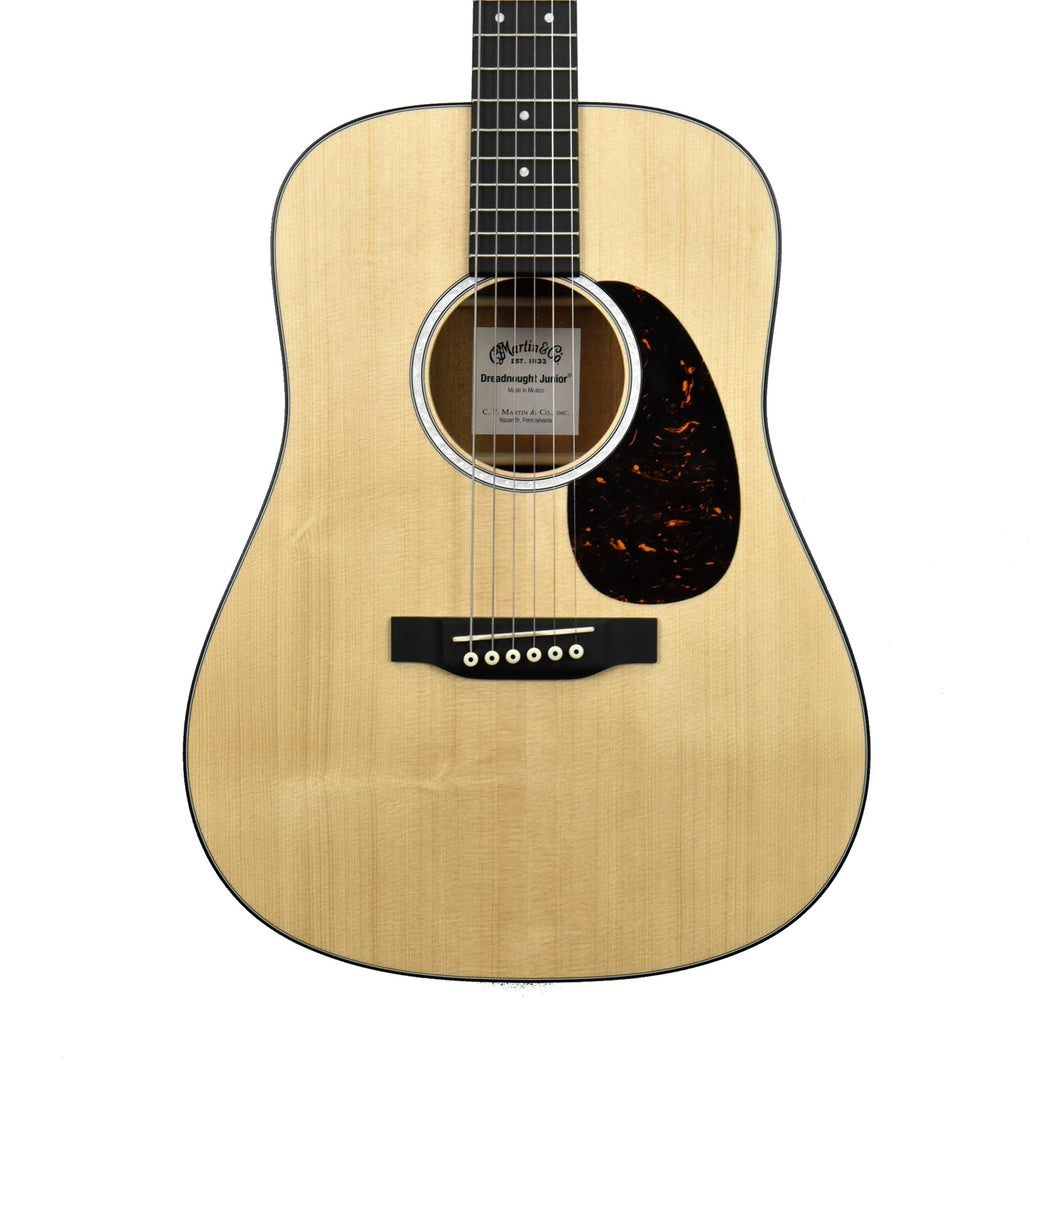 Martin DJr-10 Acoustic Guitar in Natural 2704193 - The Music Gallery